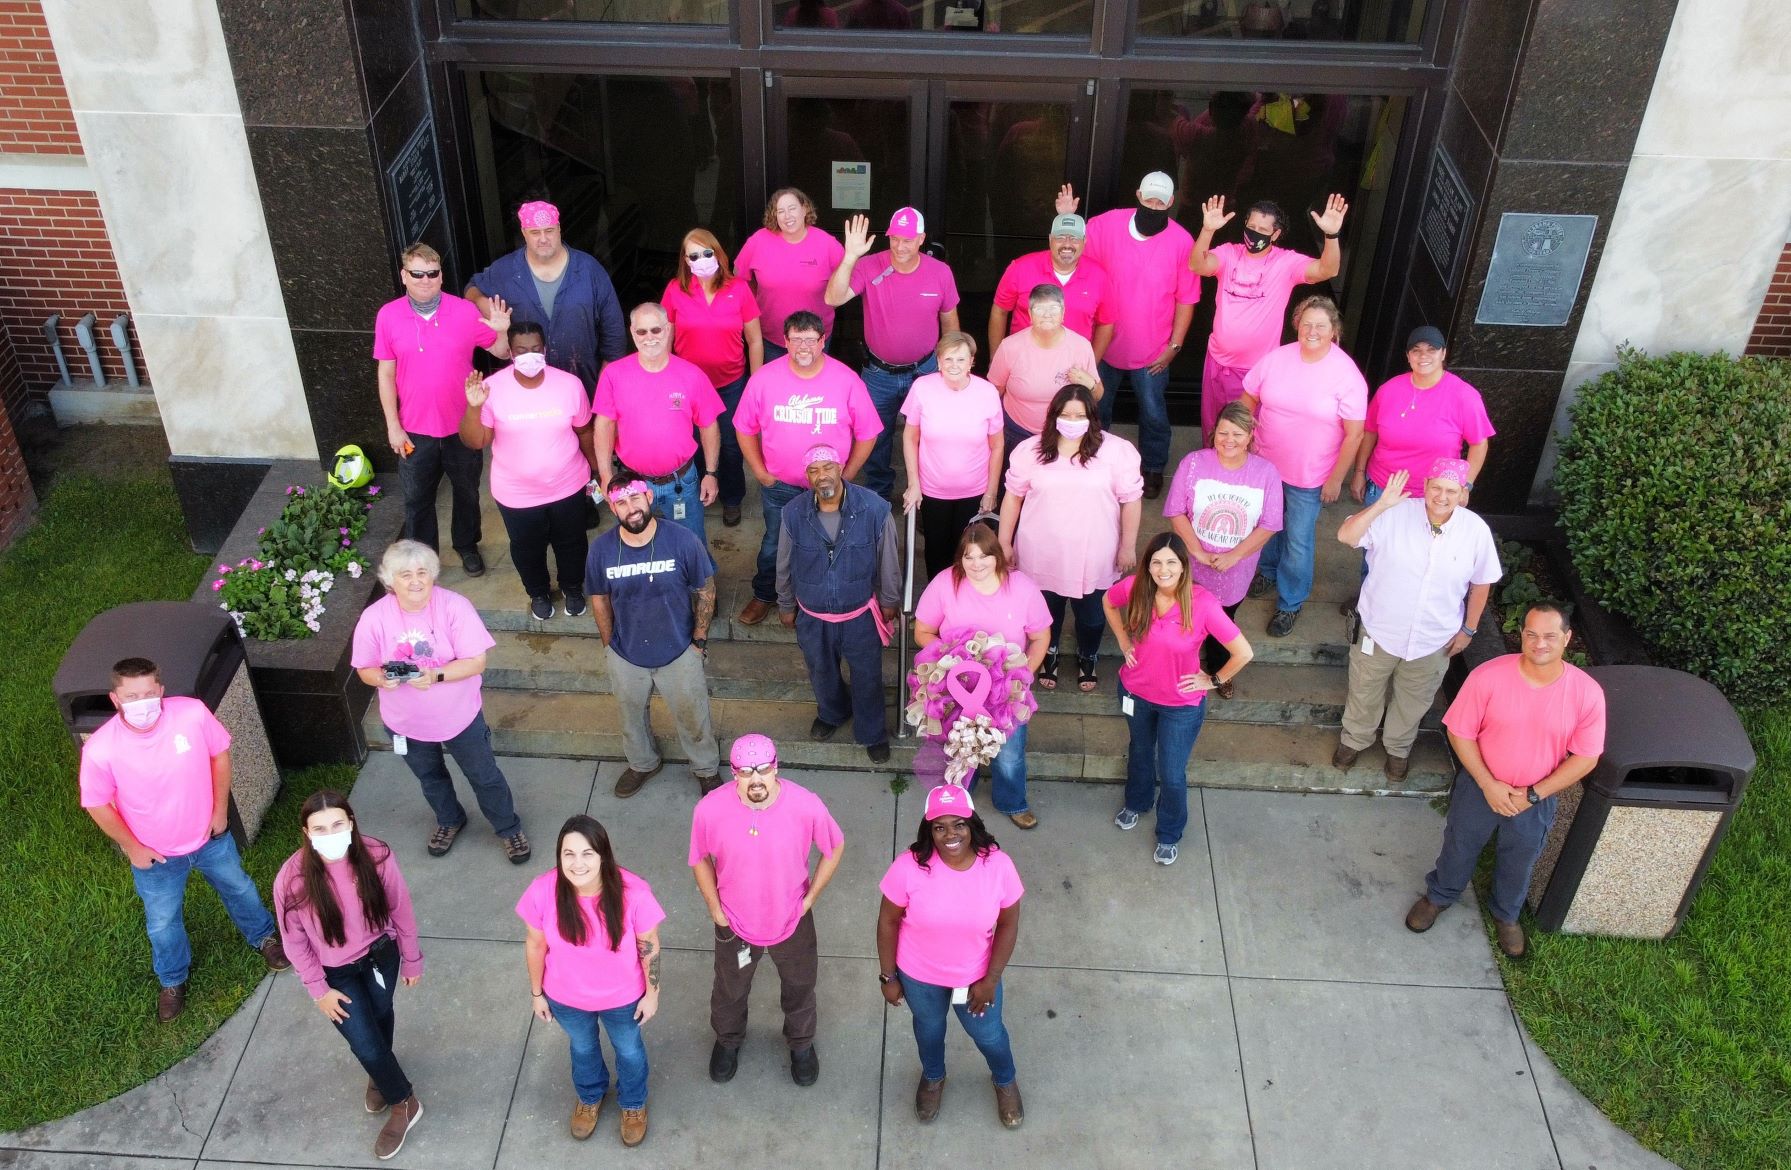 " We support Breast Cancer Awareness to support those fighting and honor those who have lost their battle. "-Elizabeth Copeland, Plant Barry